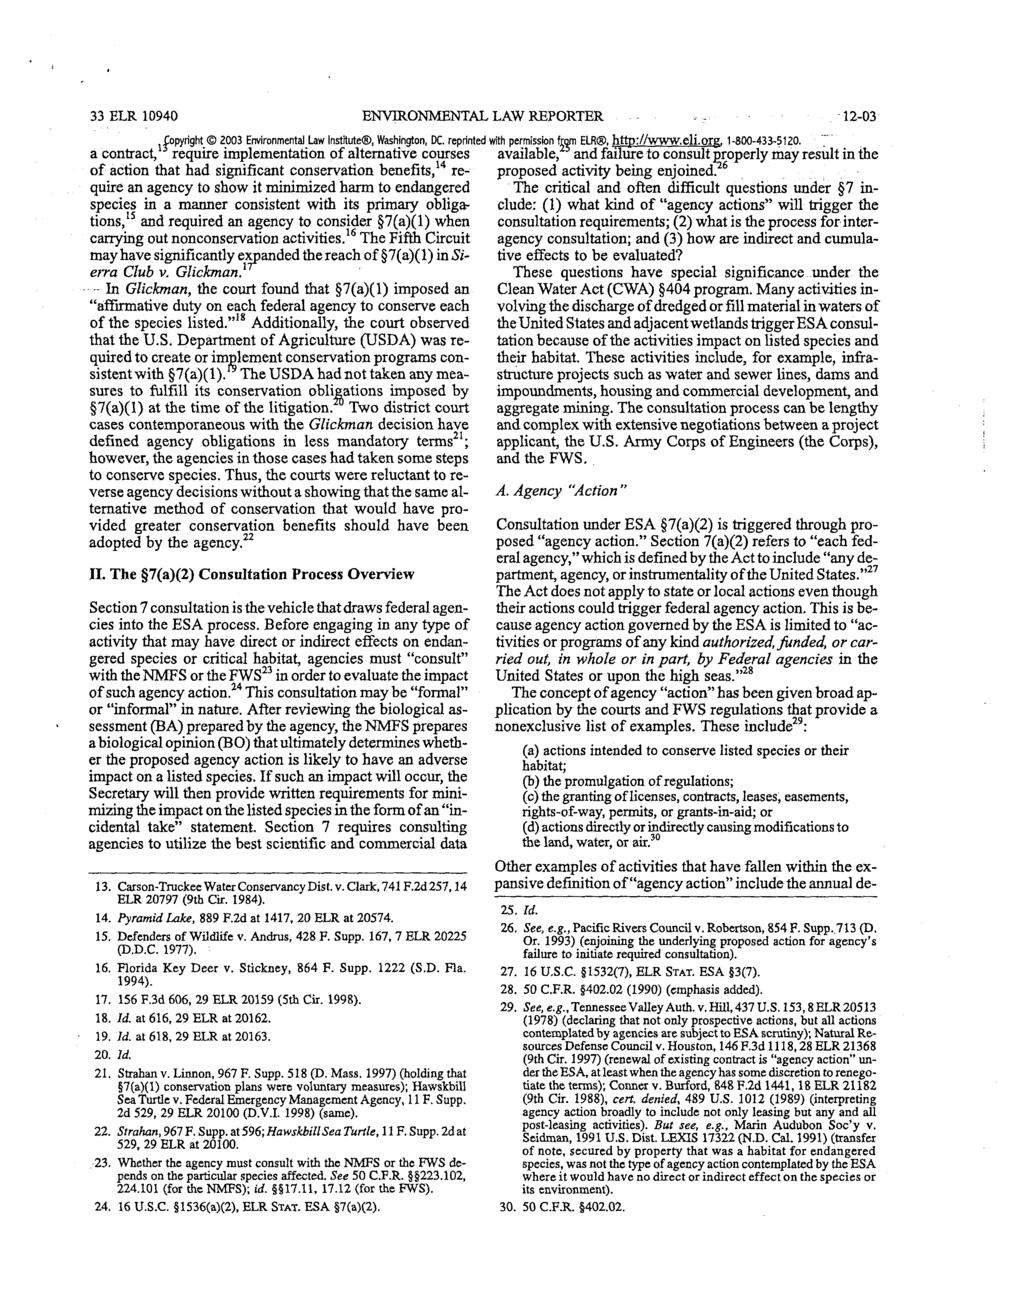 33 ELR 10940 ENVIRONMENTAL LAW REPORTER 12-03 Copyright 2003 Environmental Law Institute, Washington, DC. reprinted with permission from ELR, http://www.eli.org, 1-800-433-5120.